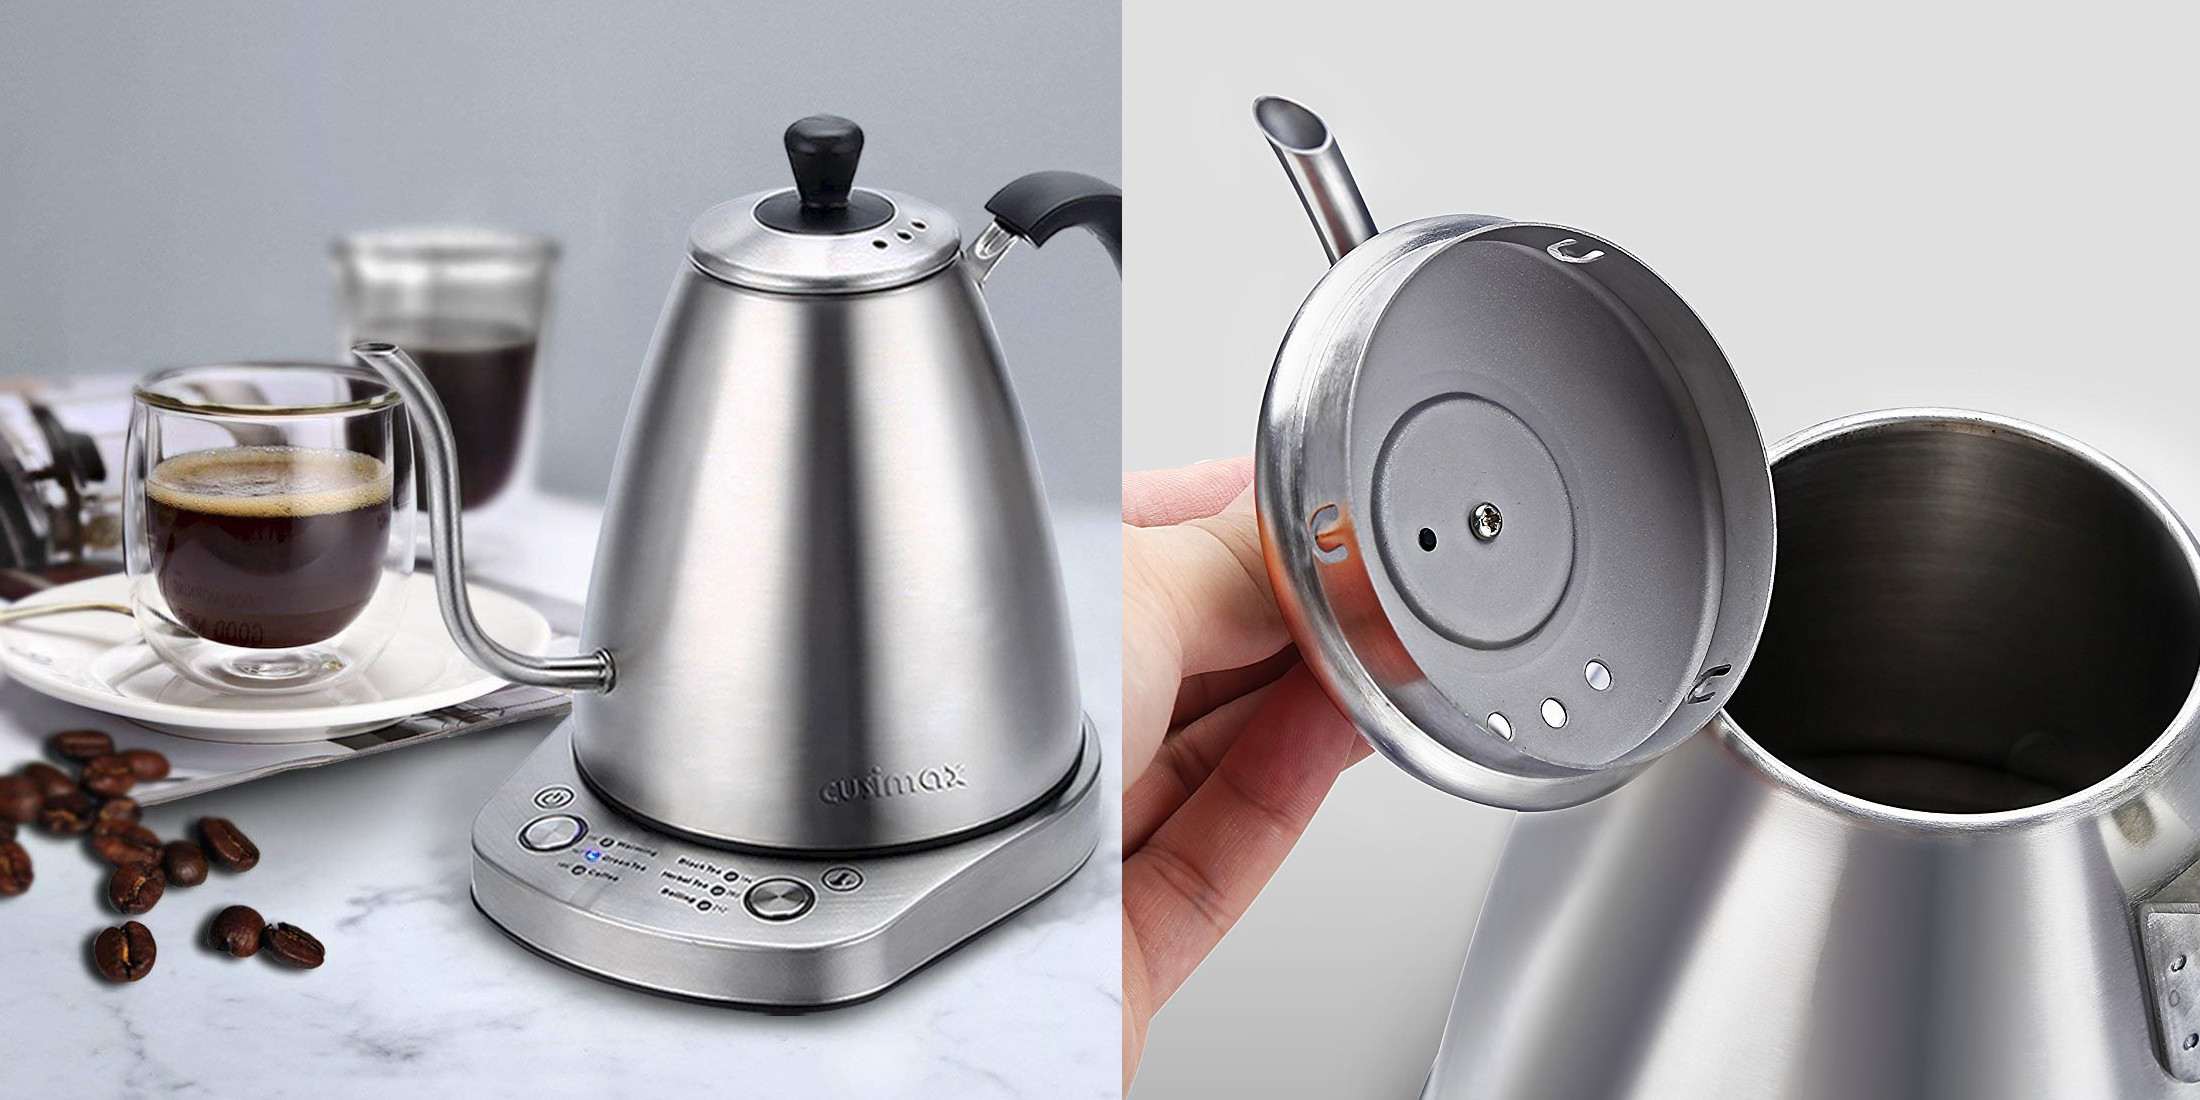 https://9to5toys.com/wp-content/uploads/sites/5/2019/02/Cusimax-Gooseneck-Electric-Kettle.jpg